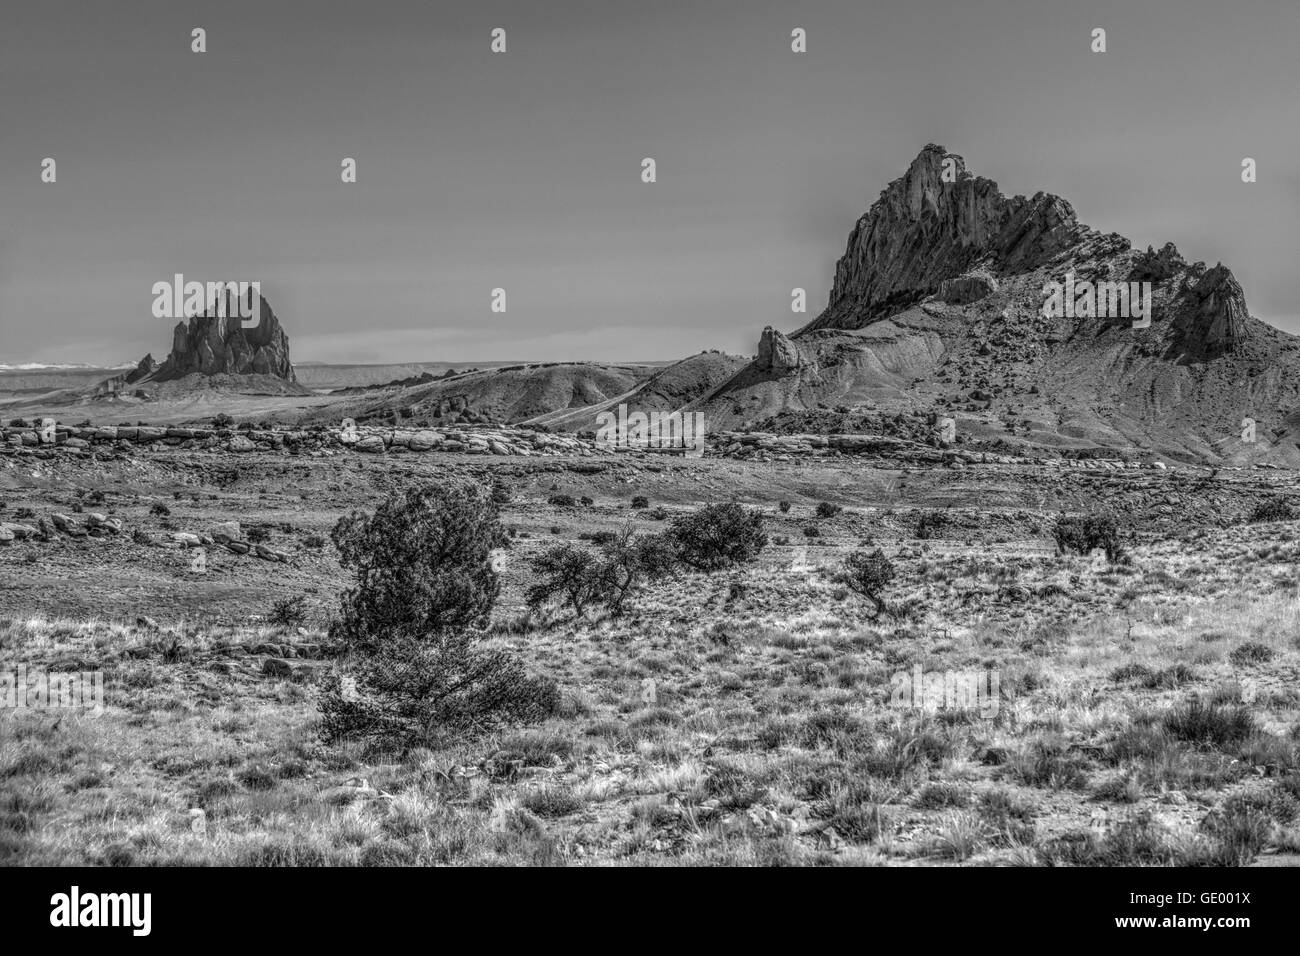 Mitten Rock, foreground, and Shiprock, background, in northwestern New Mexico Stock Photo